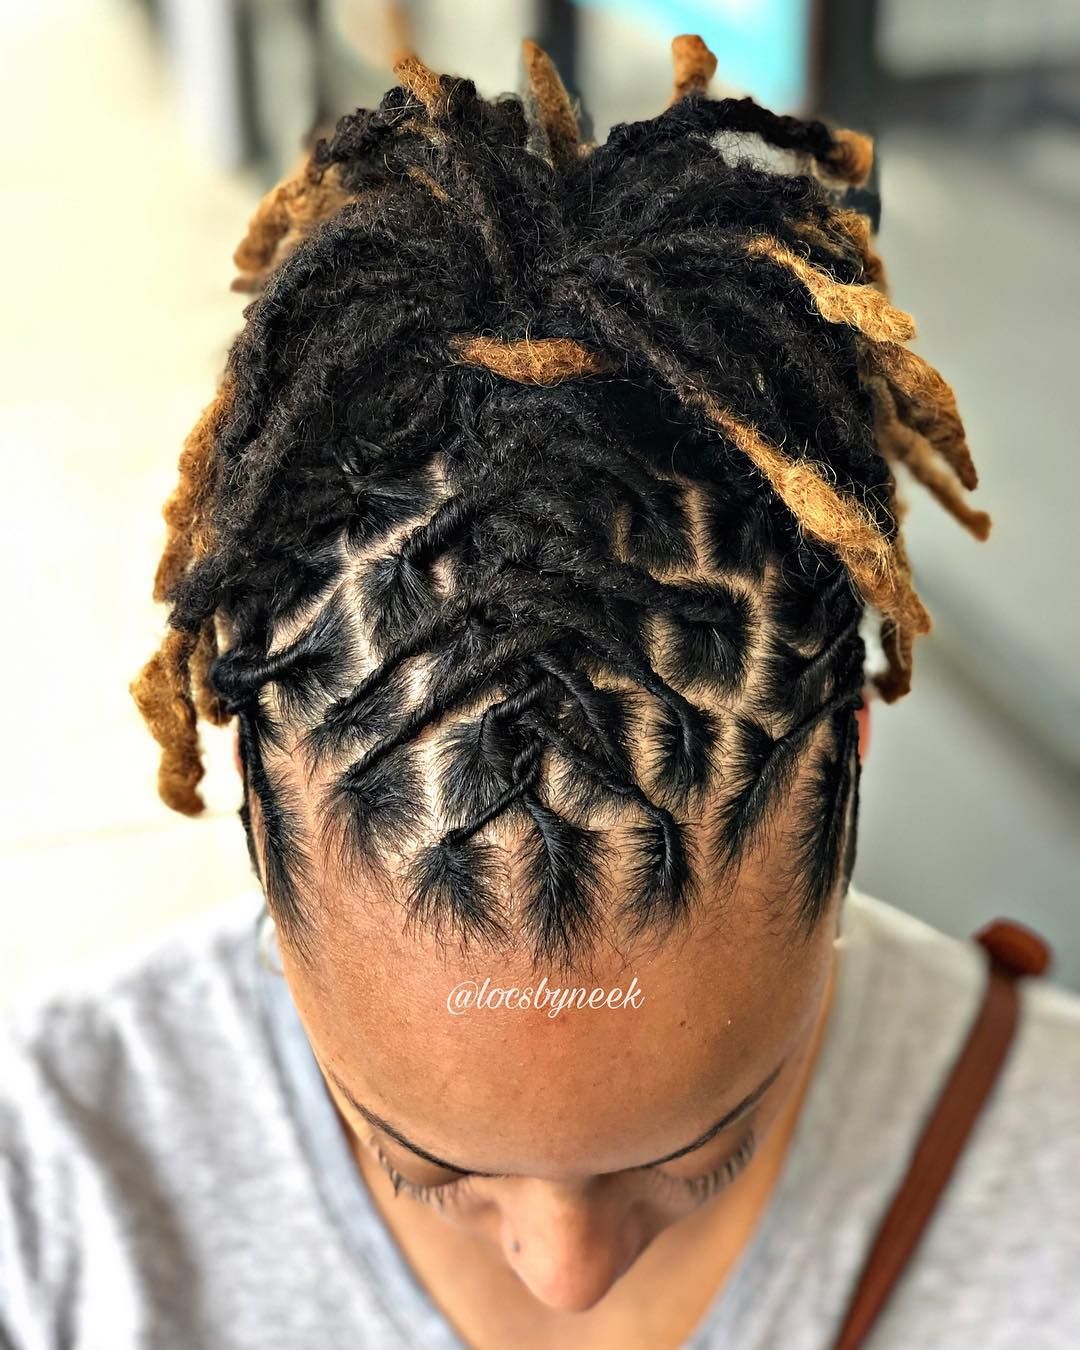 250+ African Hairstyles How To Care For Dreadlocks So They ...